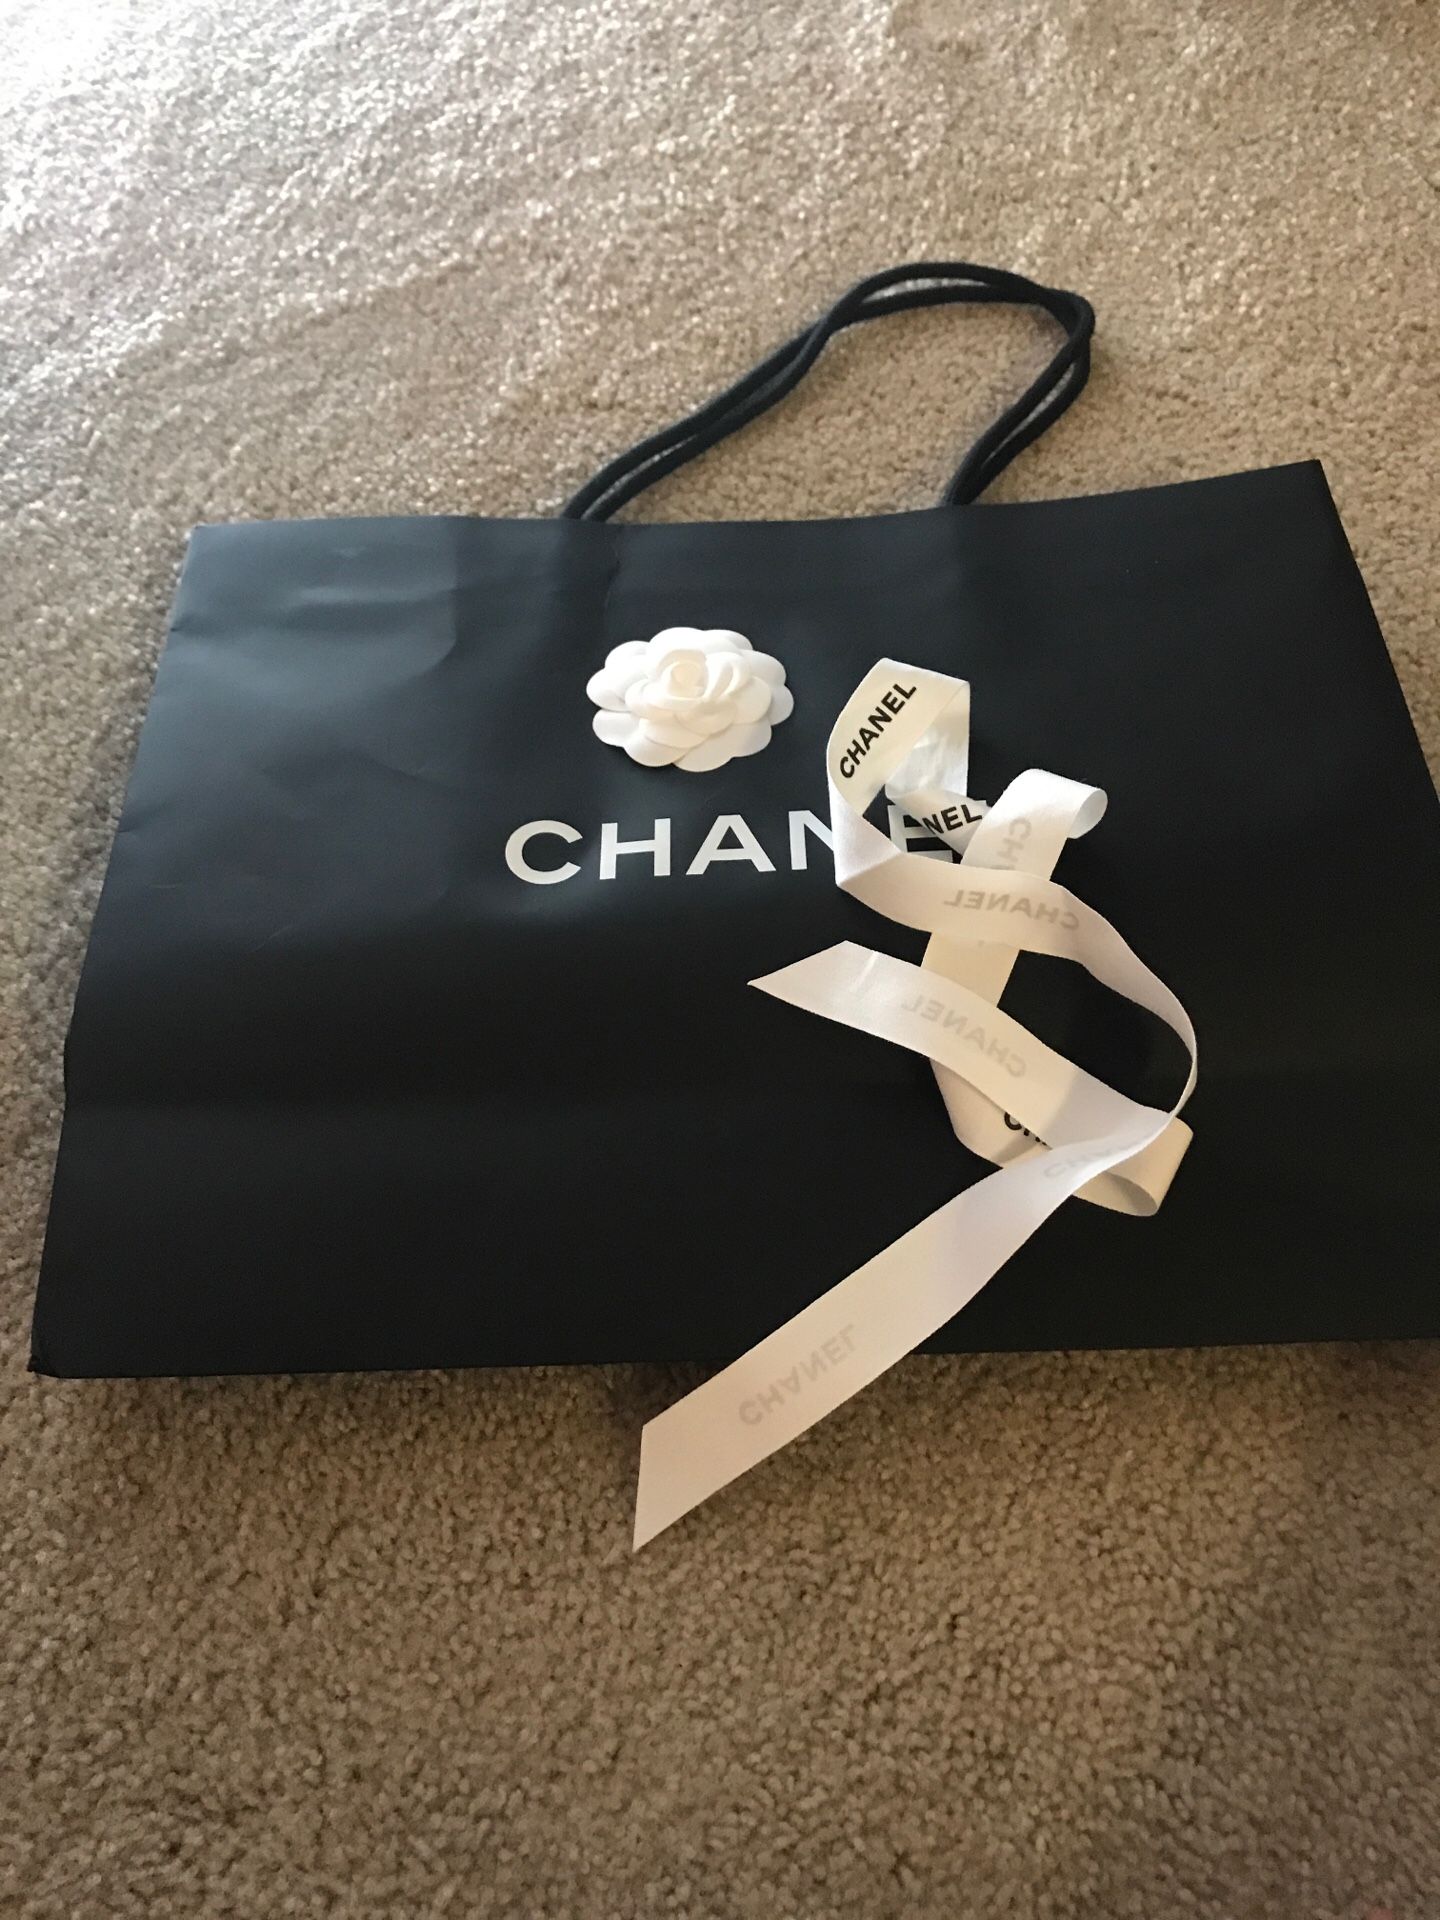 Chanel Ribbon Made Hair Tie for Sale in Independence, MO - OfferUp